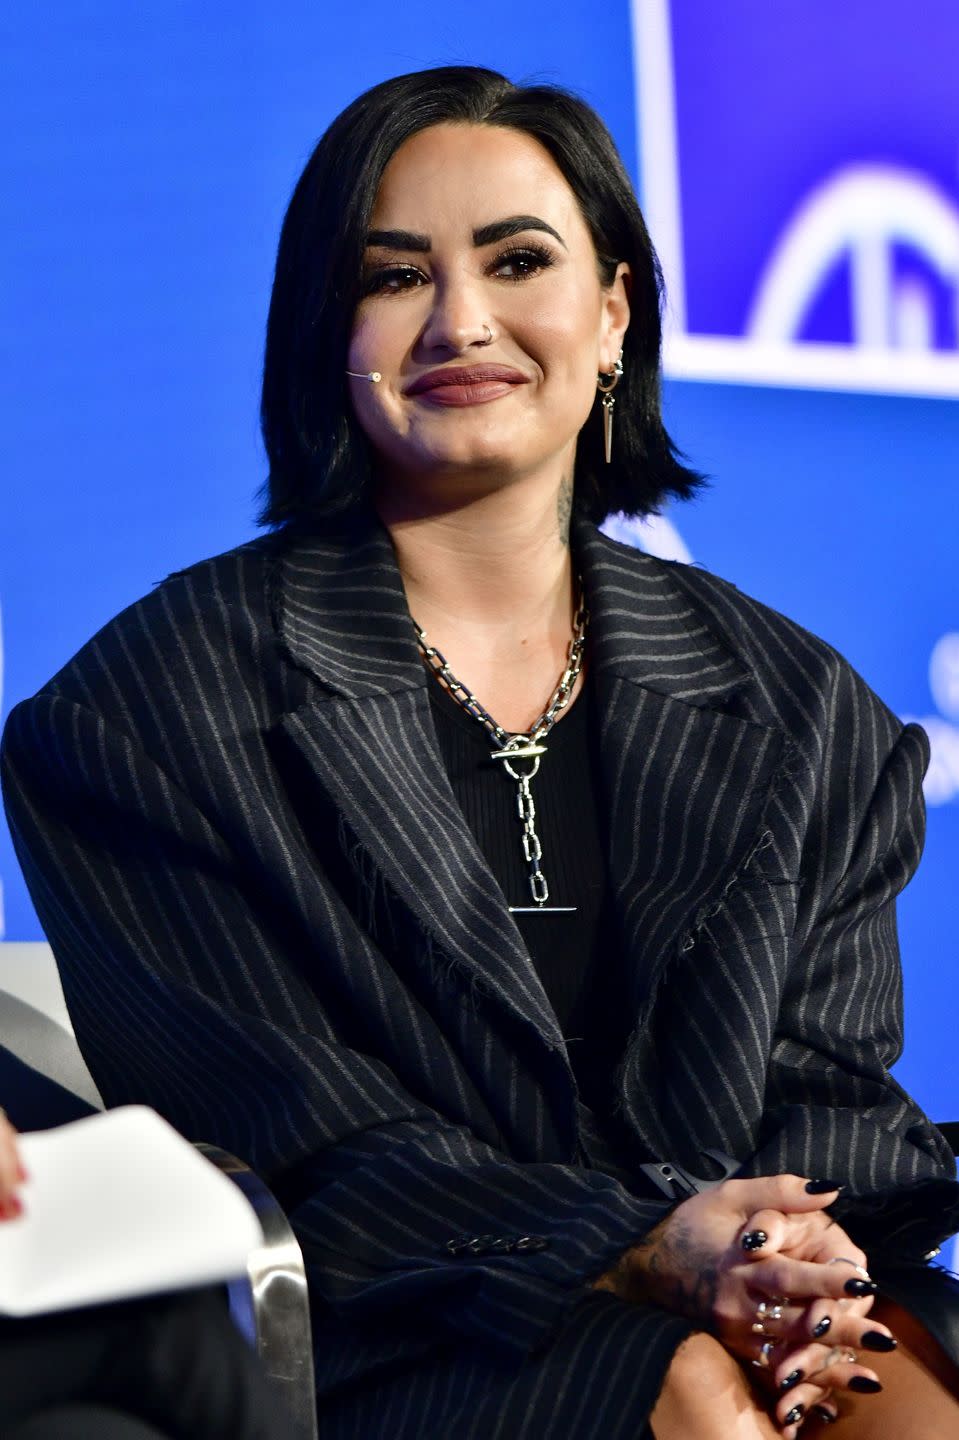 demi lovato attends the 2023 milken institute global conference at the beverly hilton on may 03, 2023 in beverly hills, california